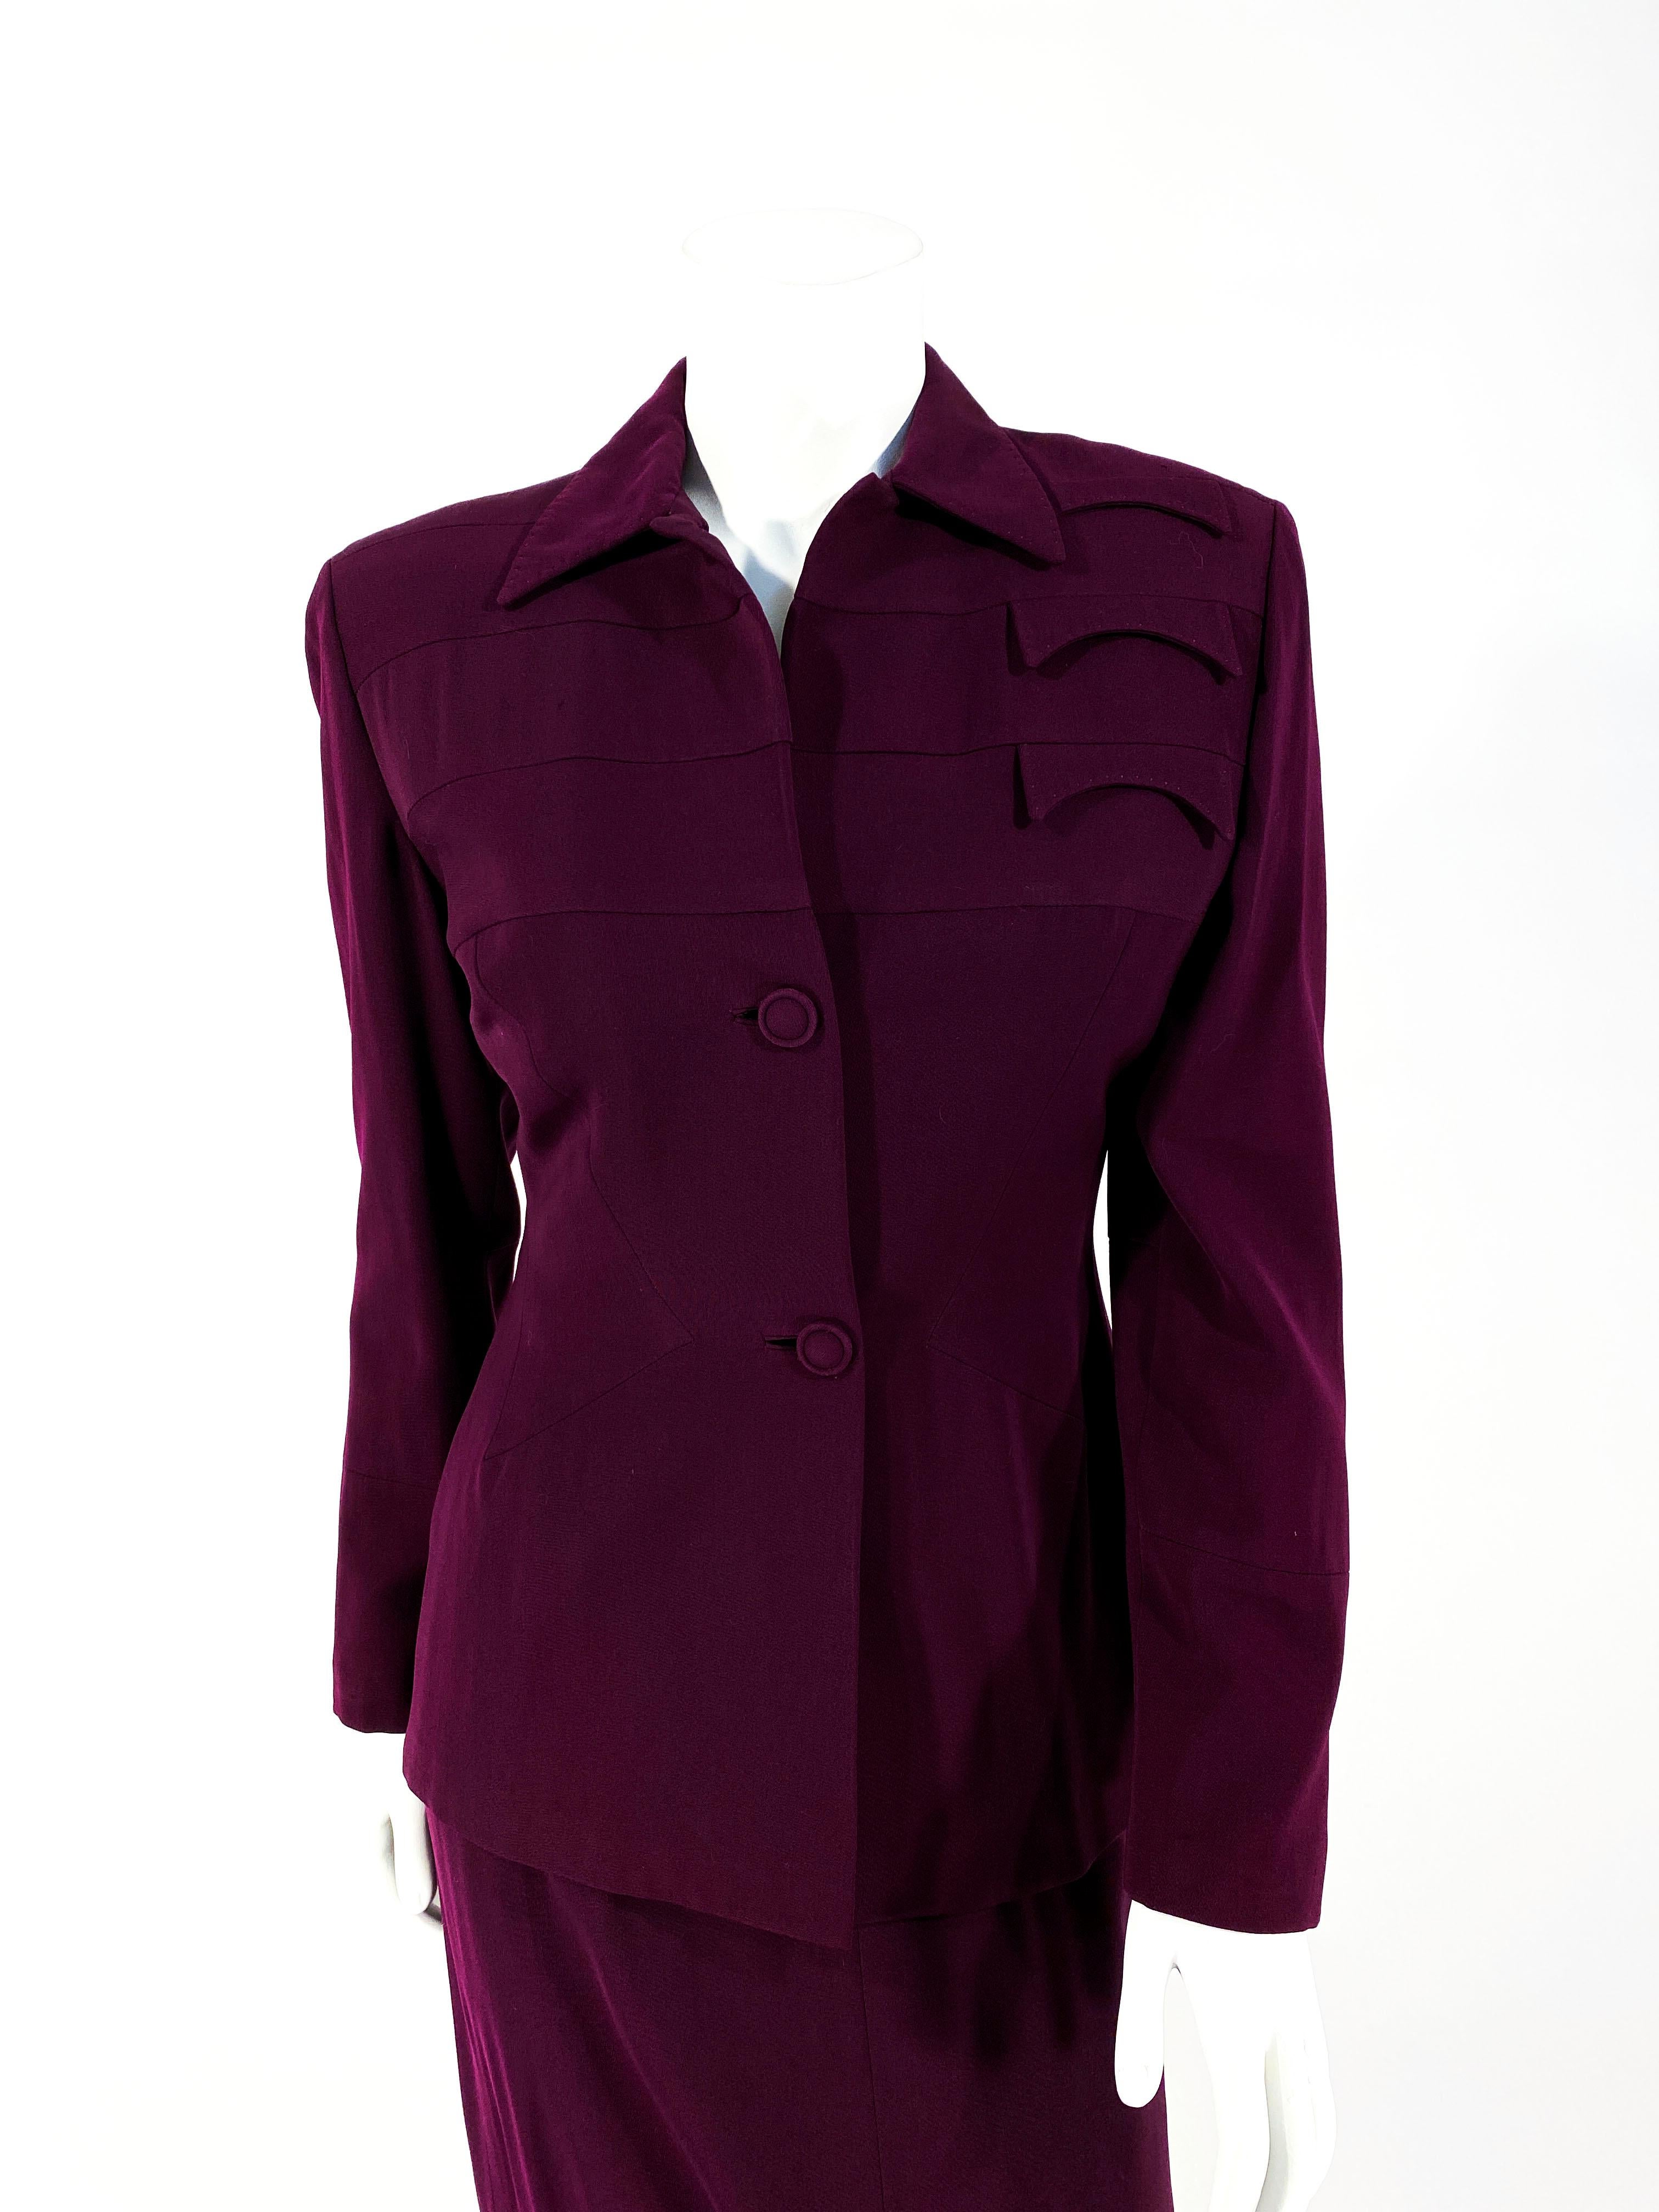 1940s wine colored wool gaberdine suit with bands of reverse material below the shoulders. The faux pockets are hand stitched decorative along the left shoulder. The cuffs are decorated with matching panels that complement the shoulder of the